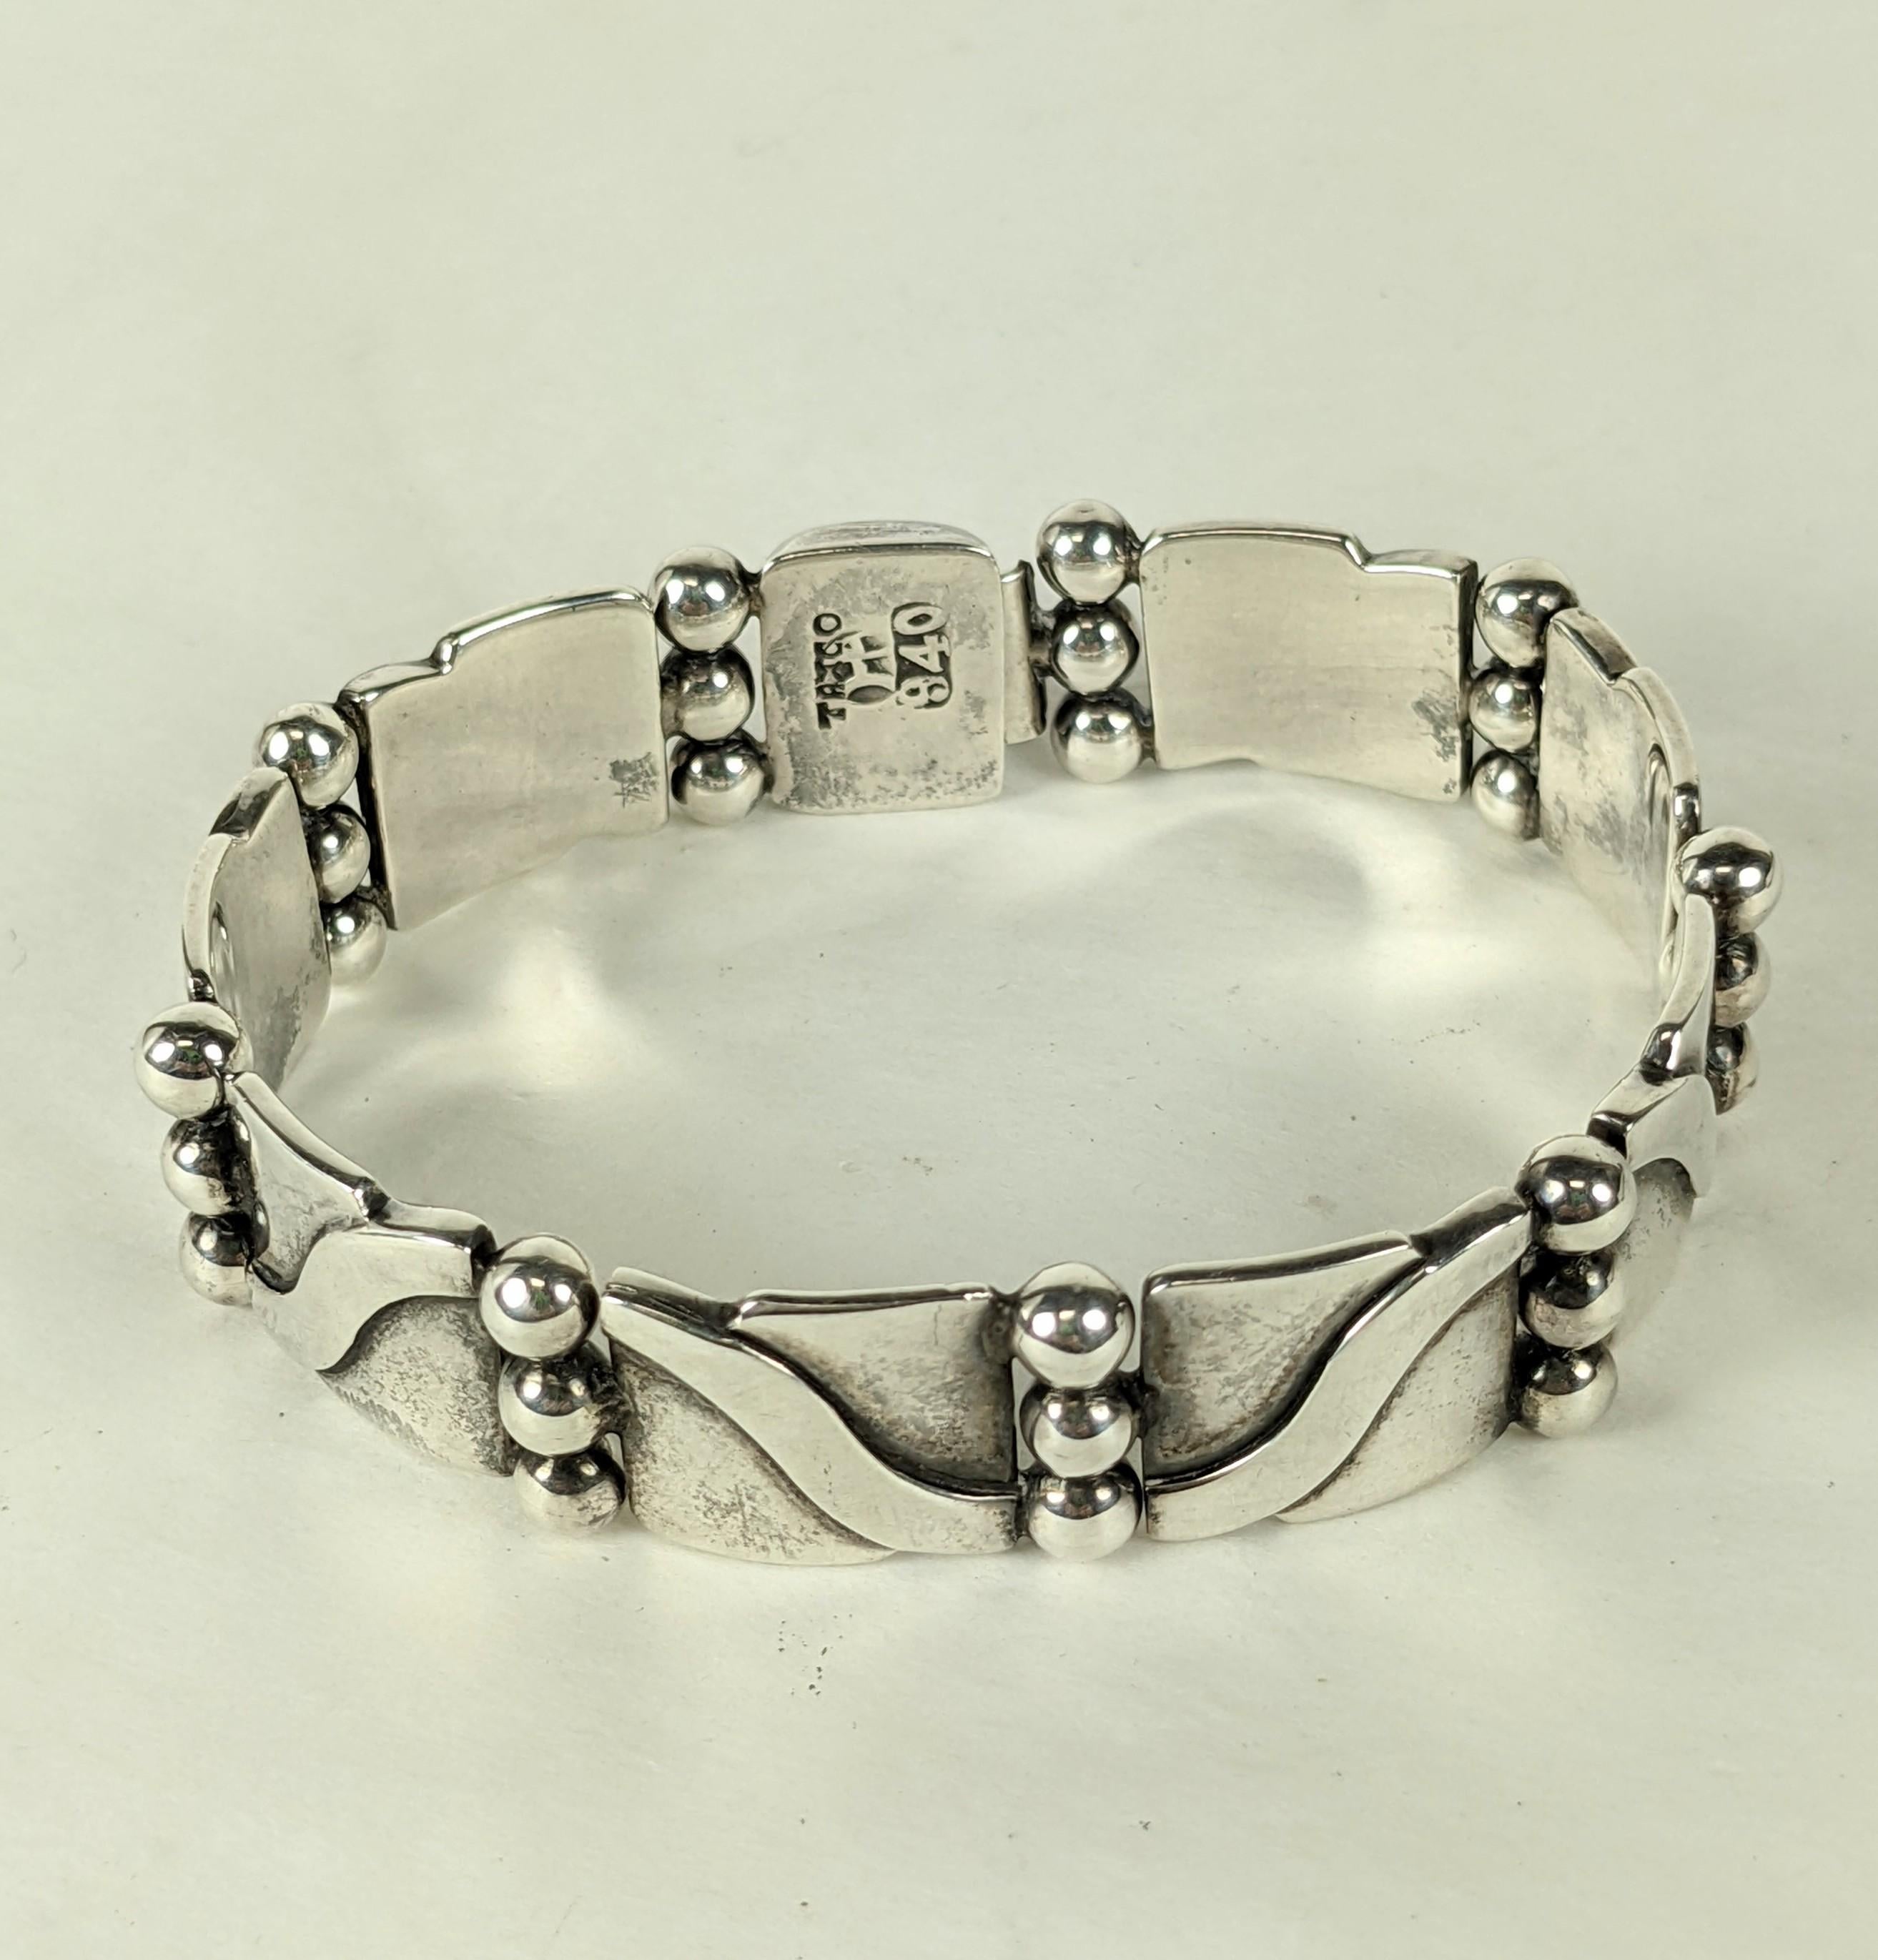 Timeless early Hector Aguilar Link Bracelet from the 1940's. High Art Deco styling with ingenious ball link hinges and undulating wavey design motif would look great on anyone. 7